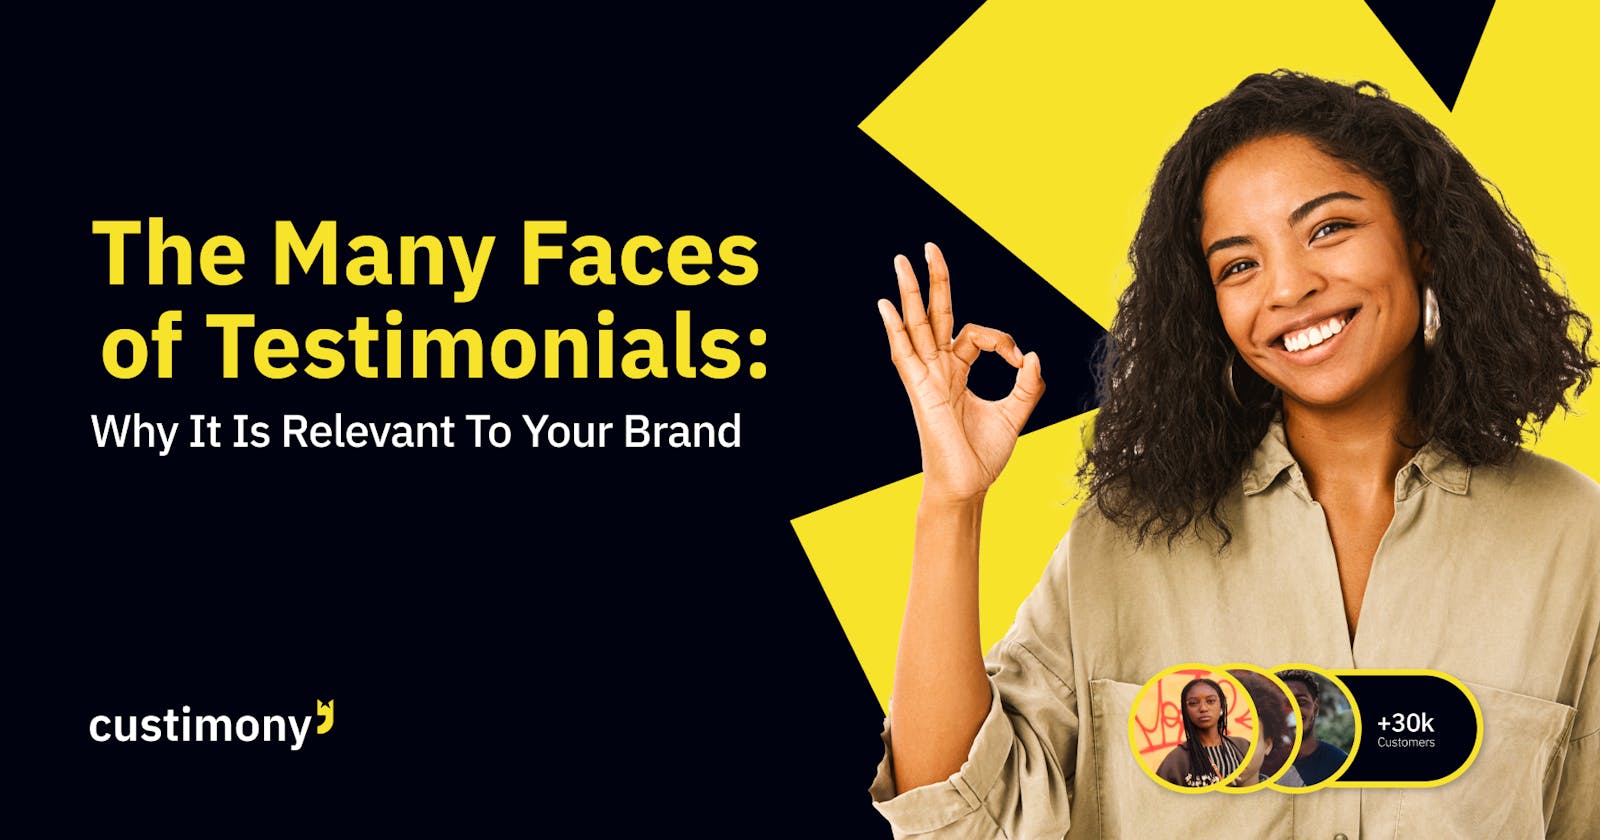 The Many Faces of Testimonials: Why It Is Relevant To Your Brand